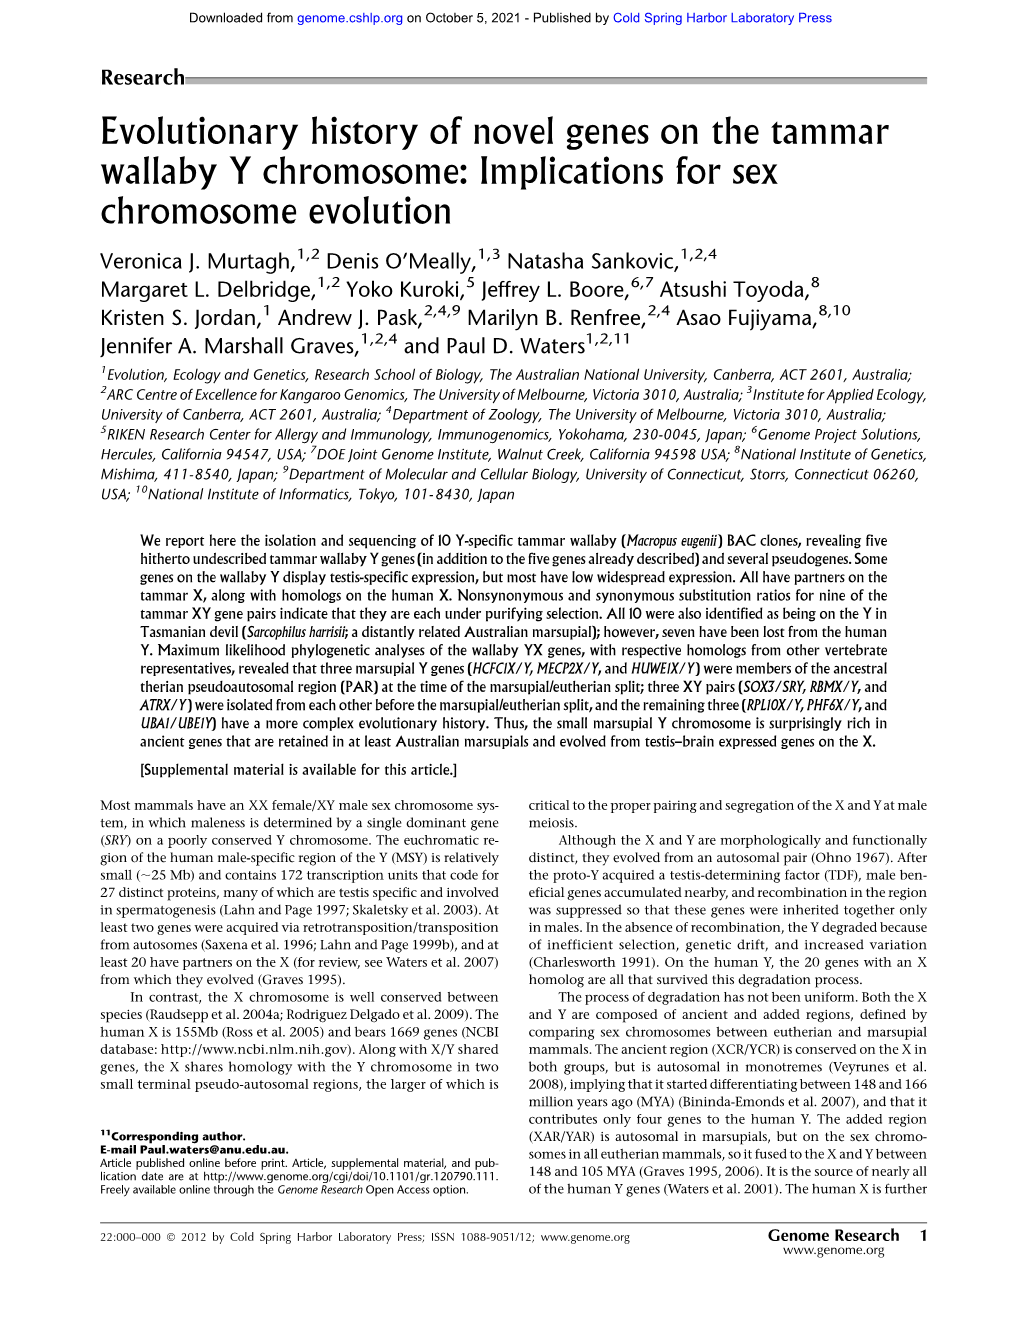 Evolutionary History of Novel Genes on the Tammar Wallaby Y Chromosome: Implications for Sex Chromosome Evolution